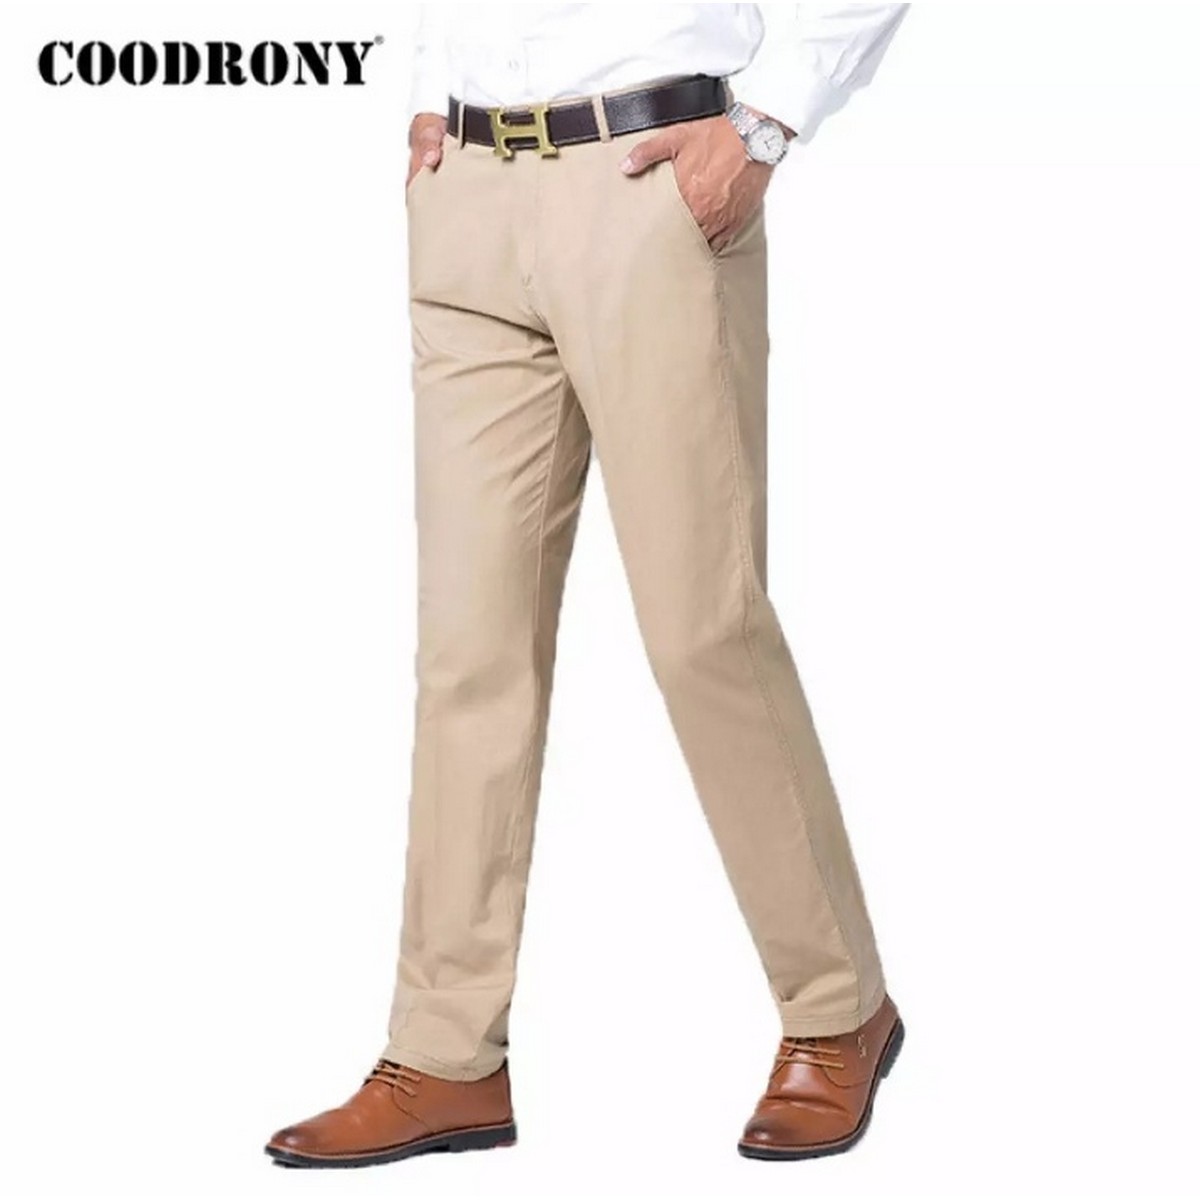 Beautiful SlimFit Cotton Jeans Pant in Camel Color for Boys Men Fashion  for Regular and party wear